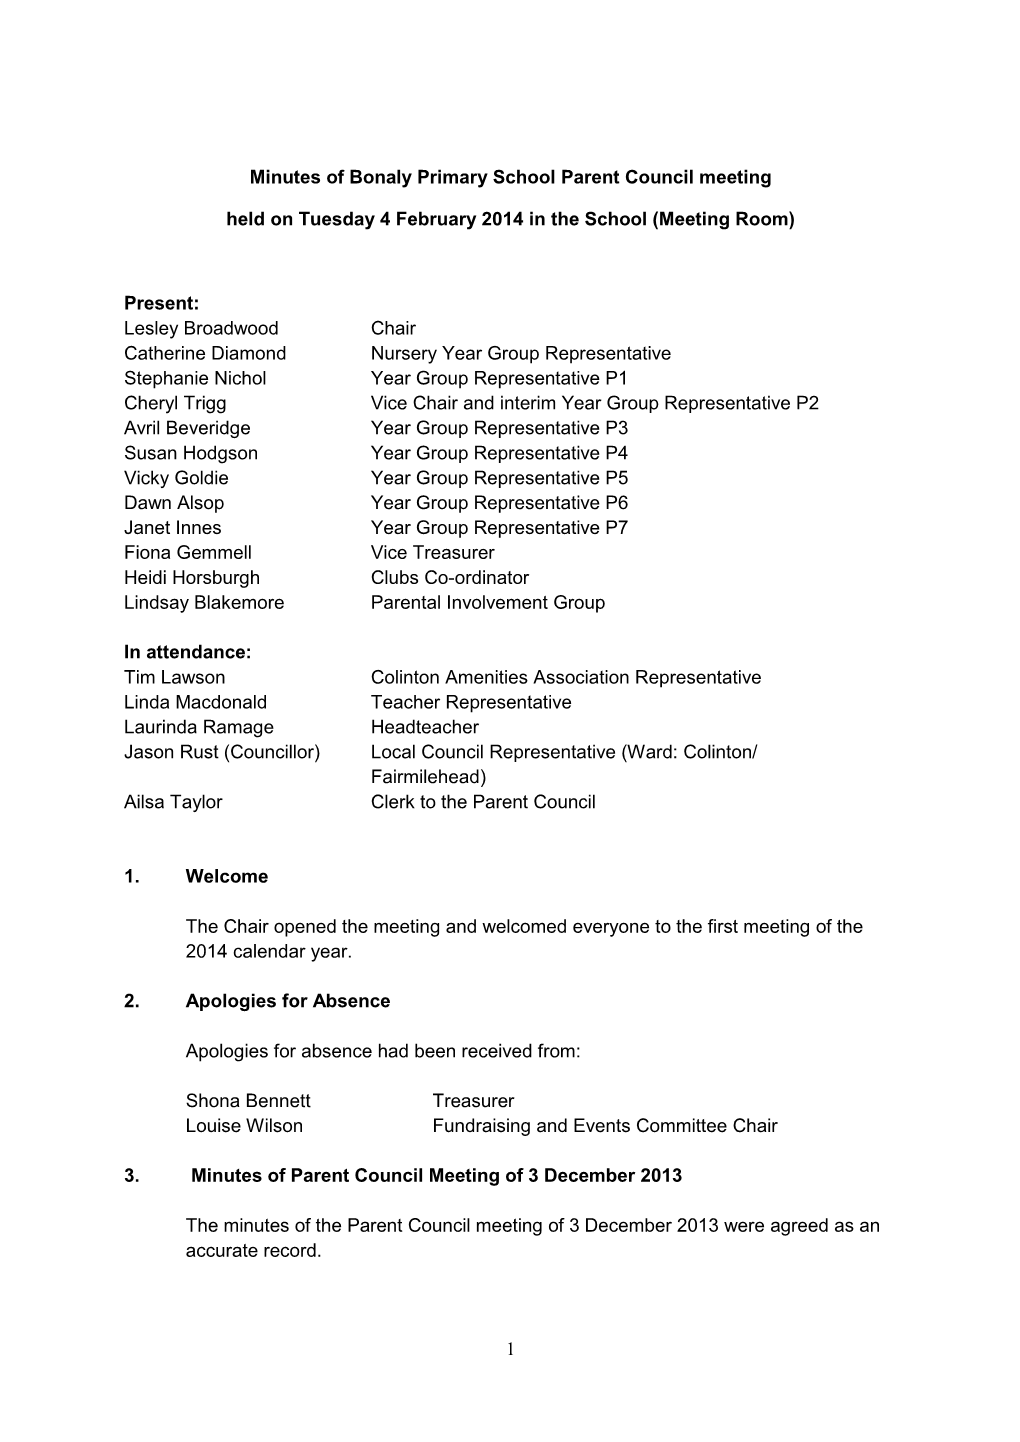 Minutes of Bonaly Primary School Parent Council Meeting